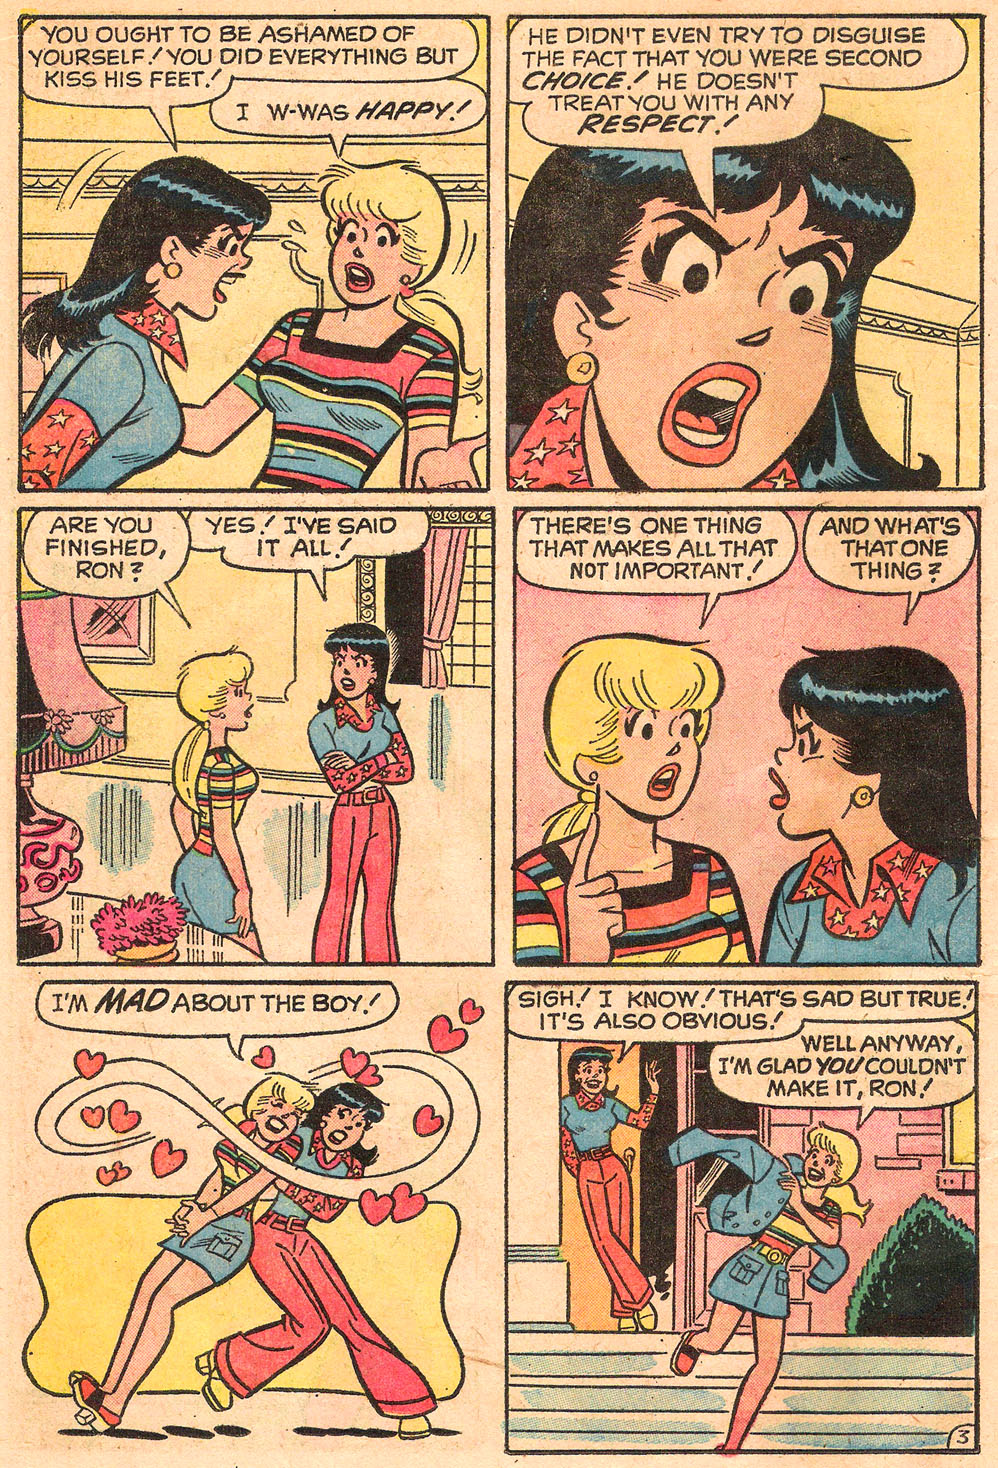 Read online Archie's Girls Betty and Veronica comic -  Issue #211 - 22